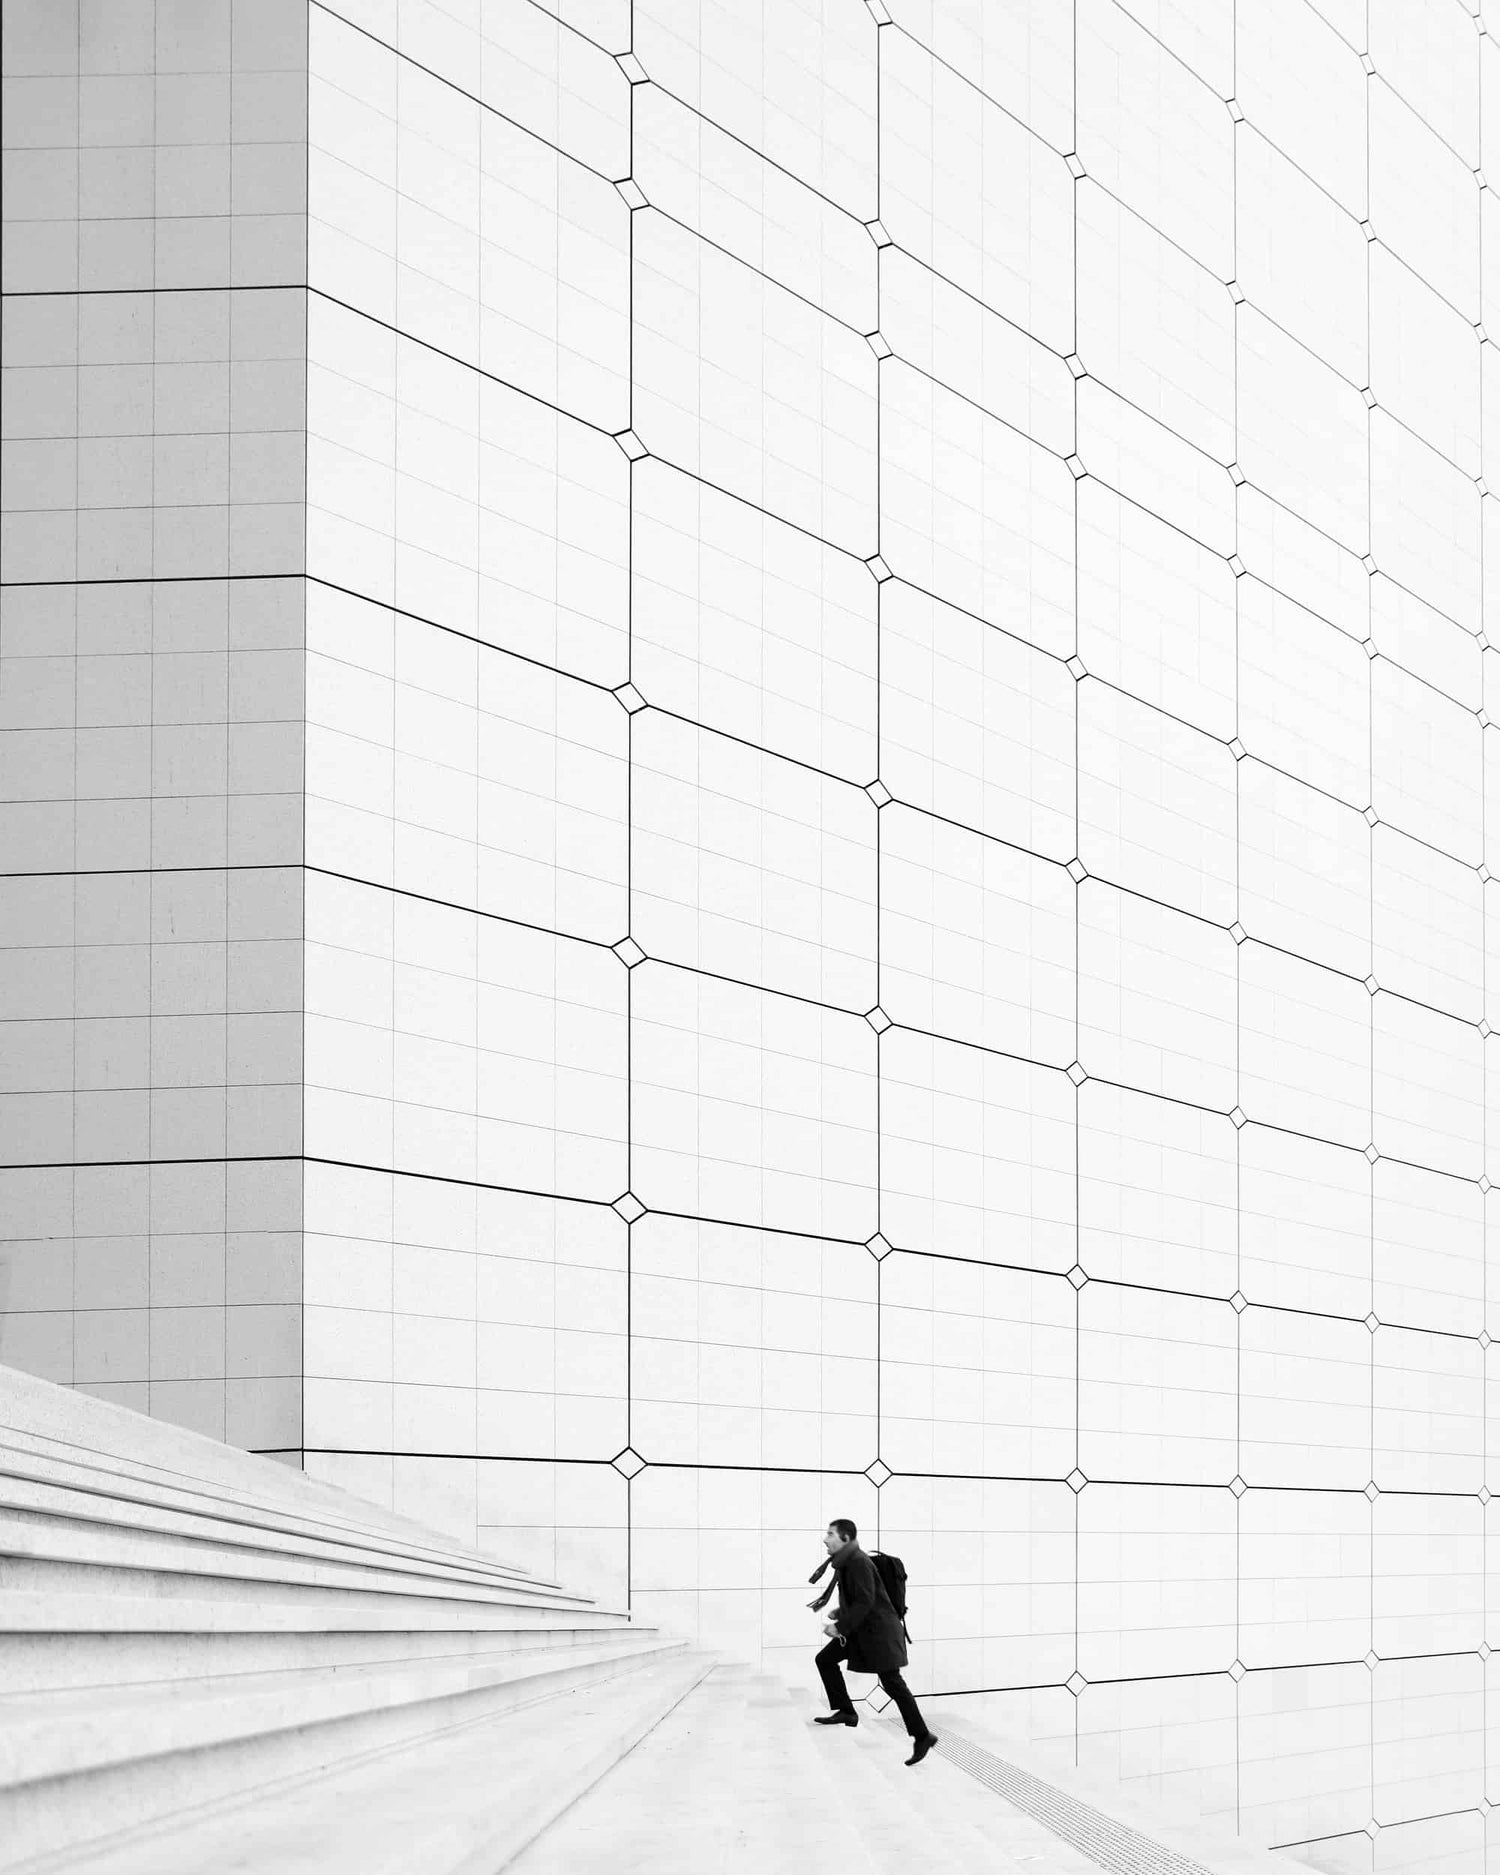 The artpiece 'Busy Business' by Nina Papiorek showing a single person running up otherwise empty steps in the business district La Défense in Paris. The artwork is completely in black and white.